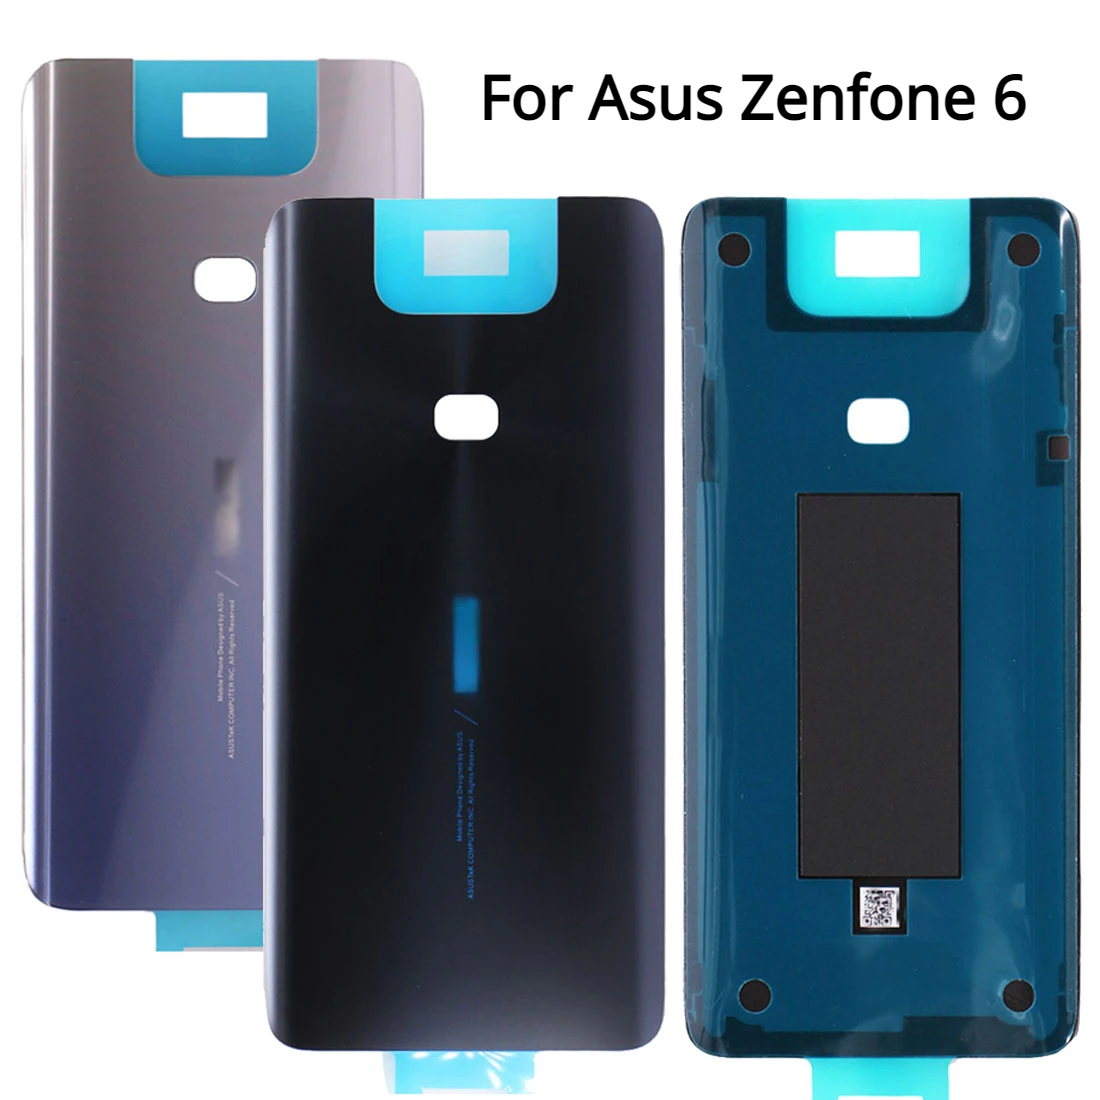 Back Glass For Asus Zenfone 6 ZS630KL Battery Cover Housing Case Replacement With - AliExpress